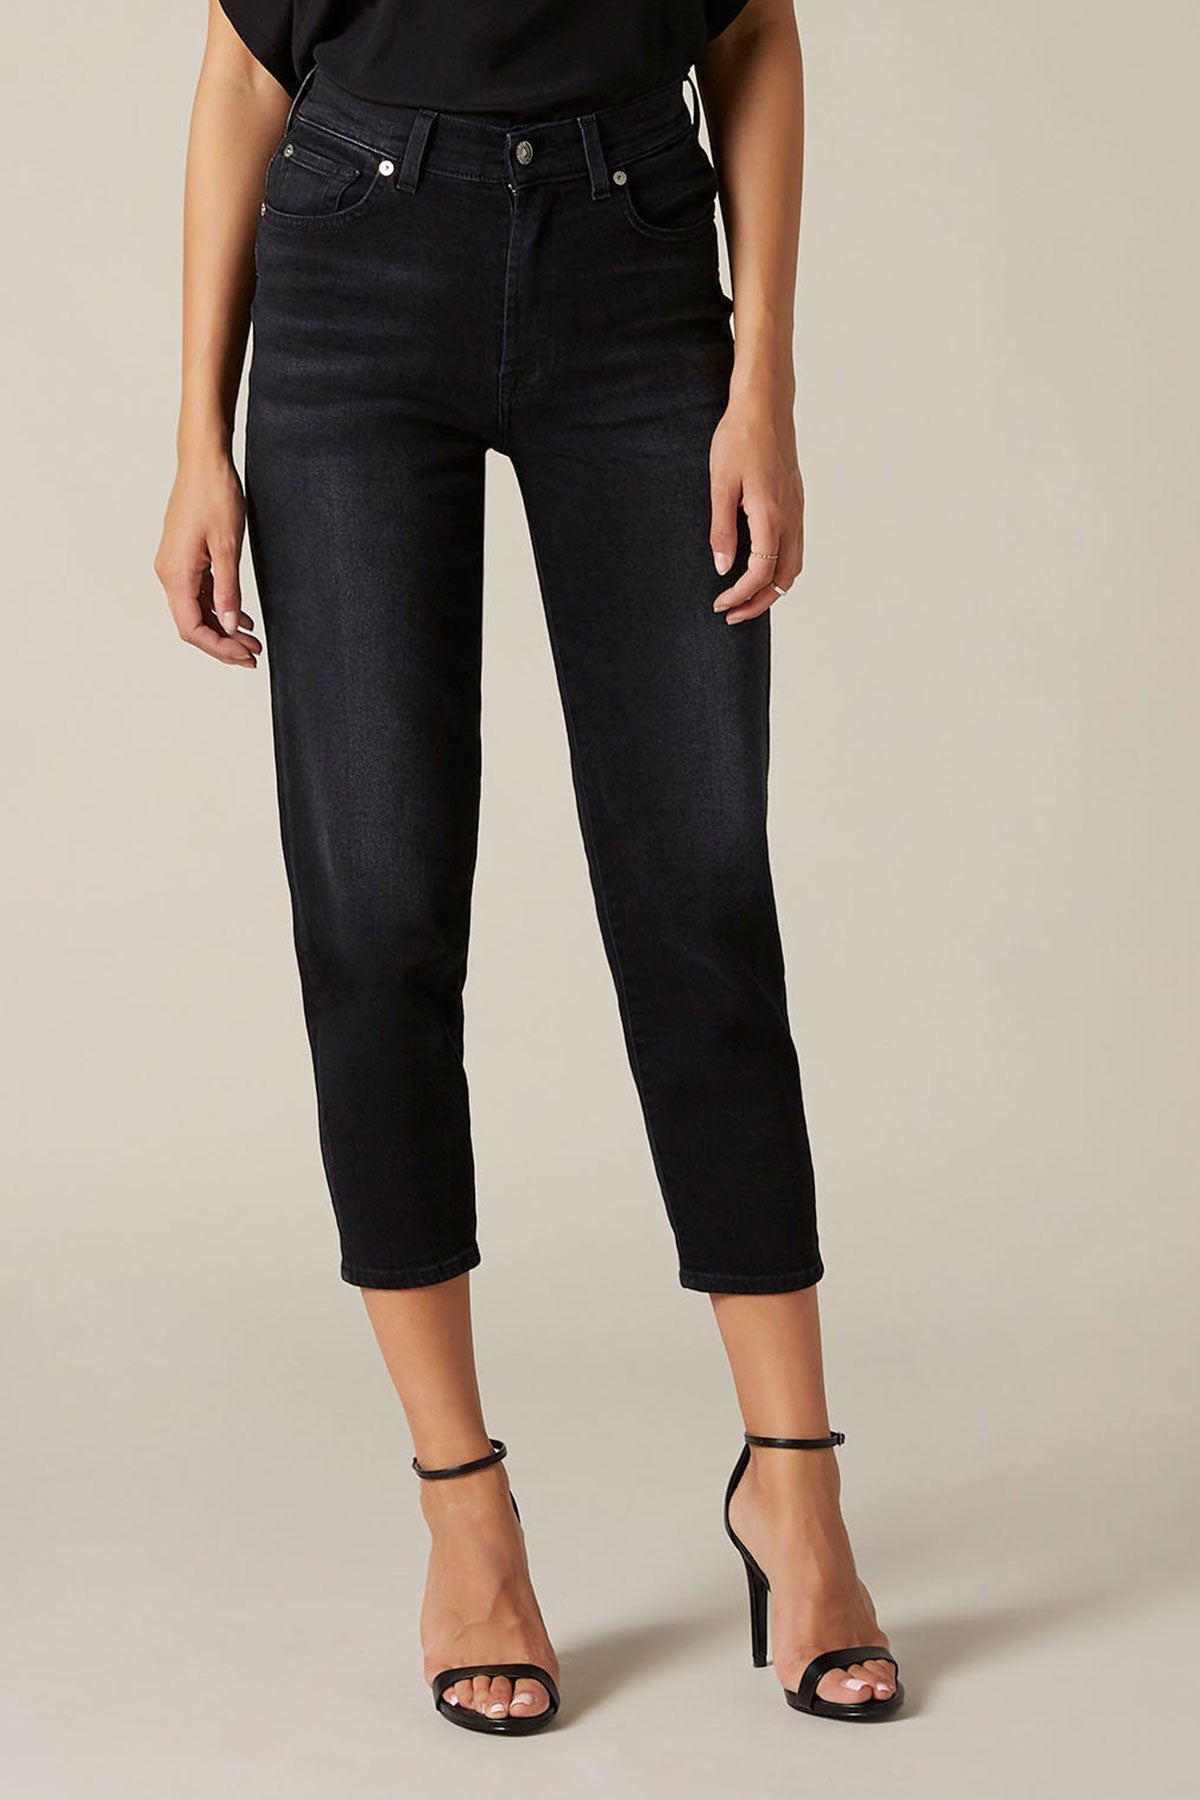 7 For All Mankind Malia Mom Fit Jeans-Libas Trendy Fashion Store